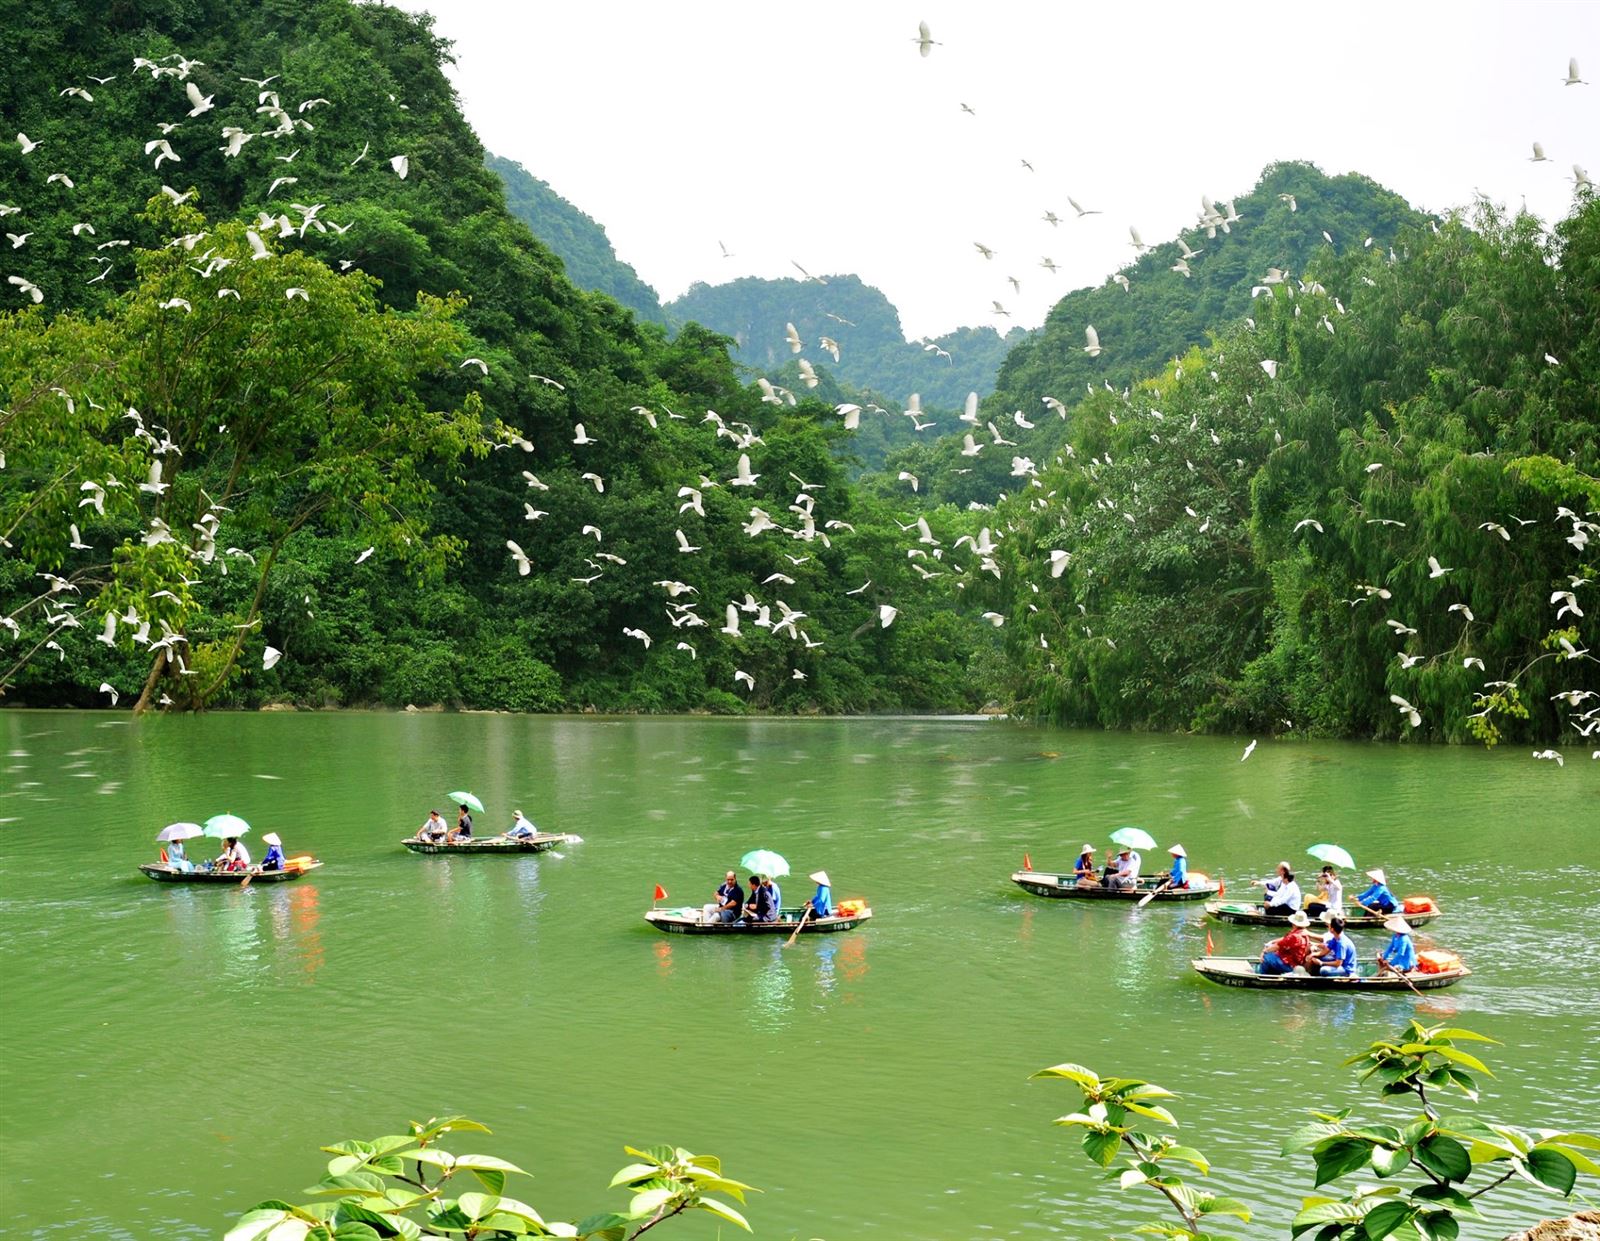 Tam Coc – Bich Dong